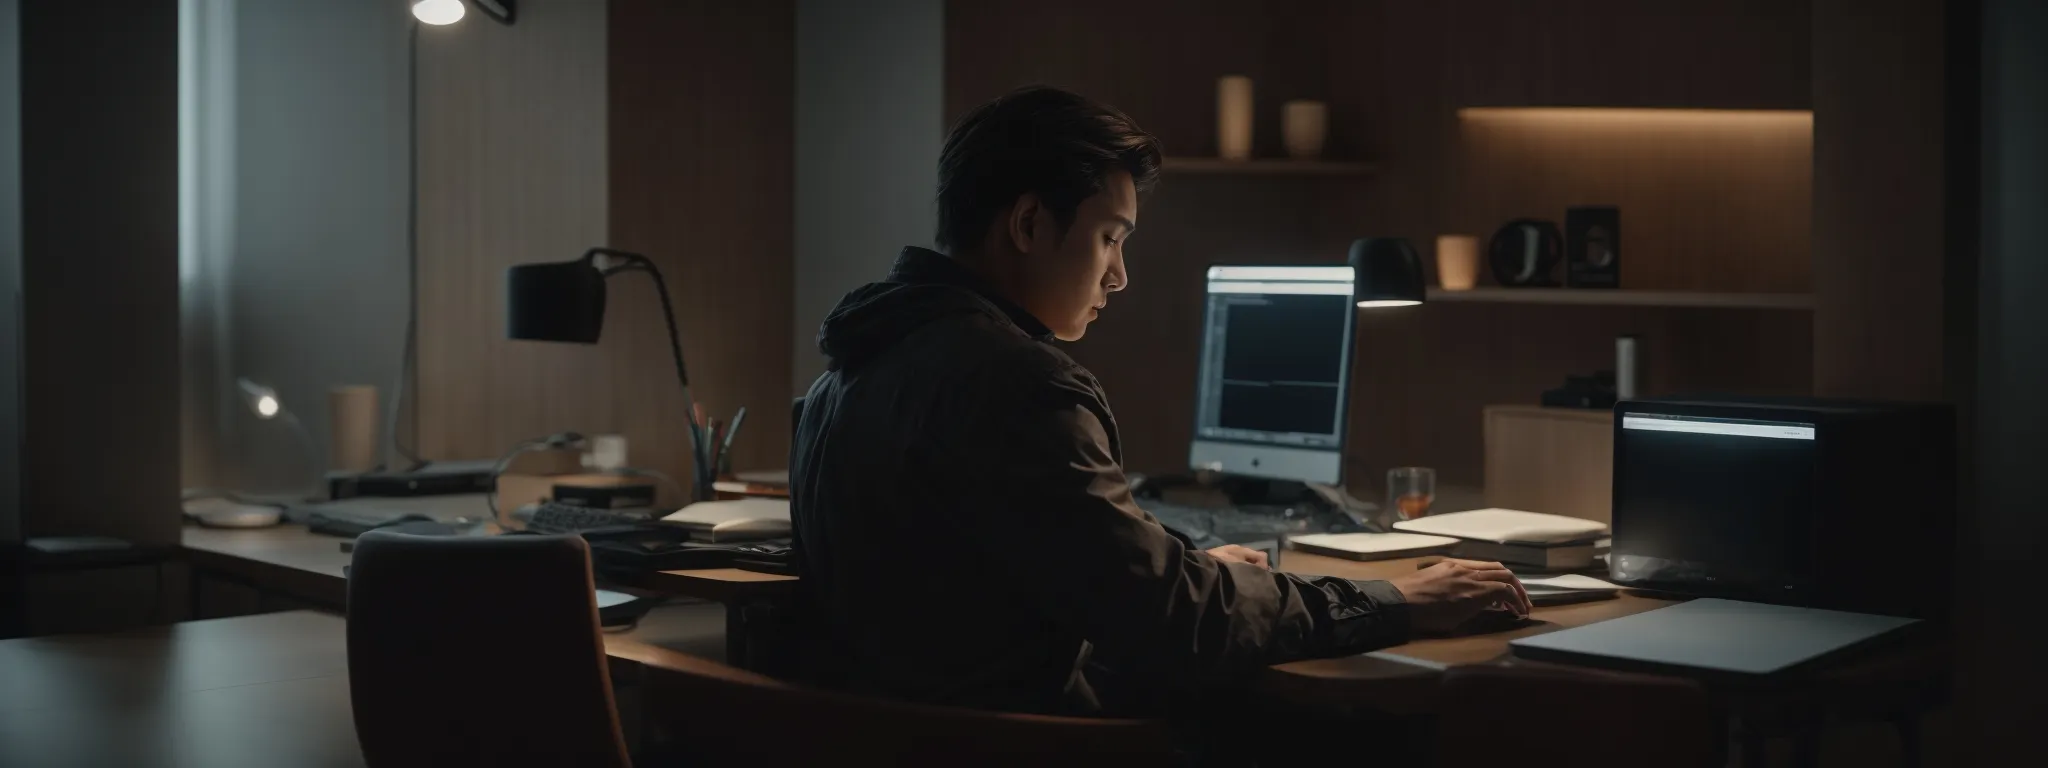 a writer sits thoughtfully at a minimalist desk, with an ai assistant interface open on a sleek, modern computer, surrounded by soft lighting.